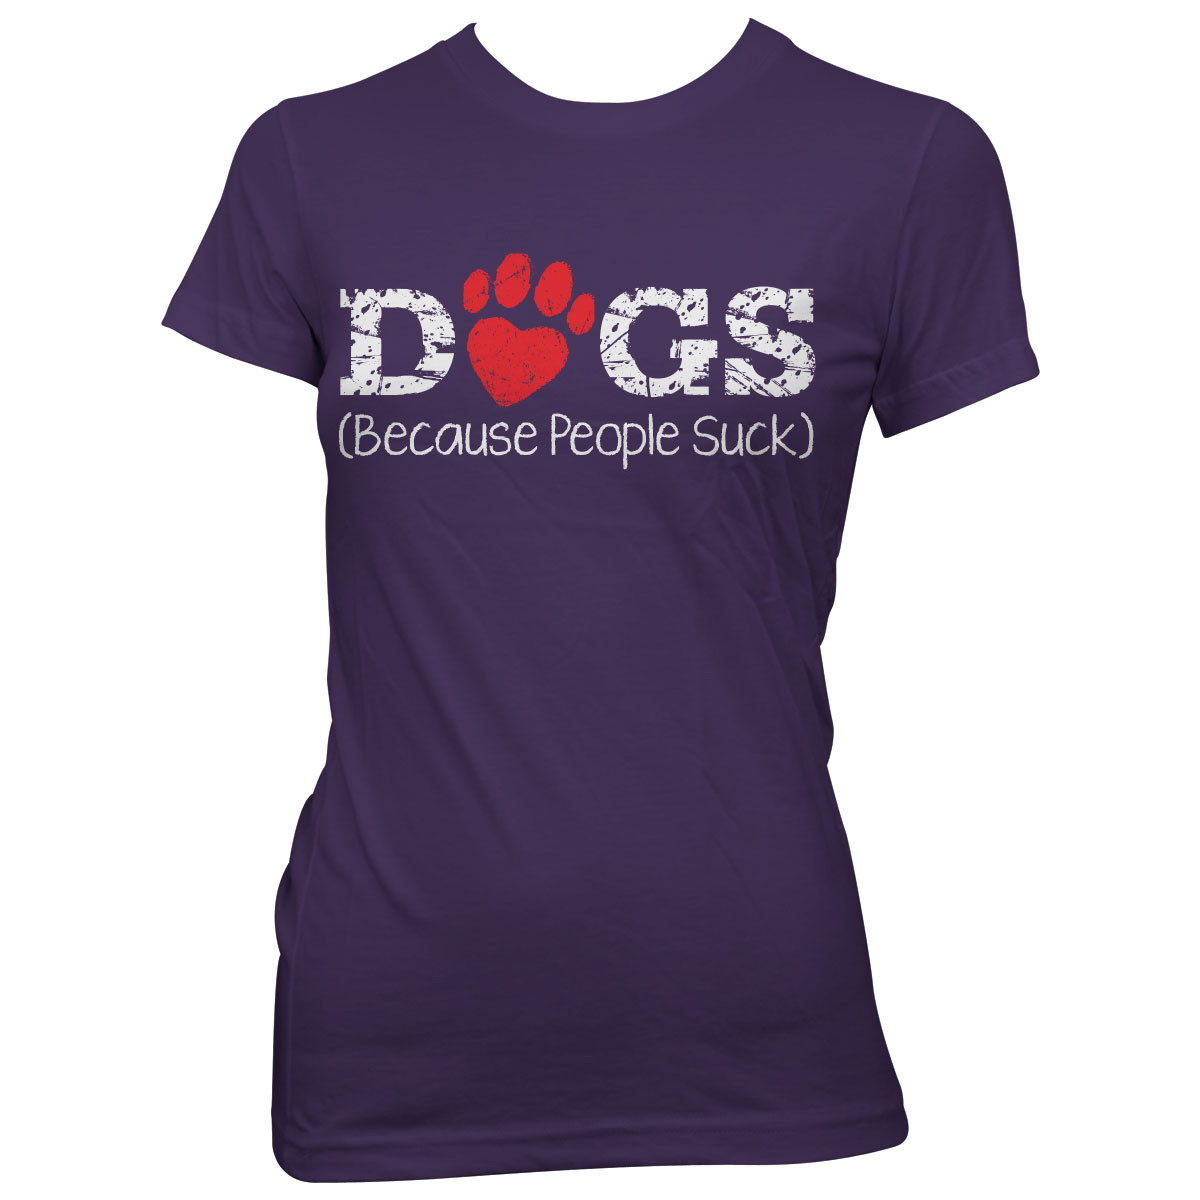 "Dogs Because People Suck" T-Shirt